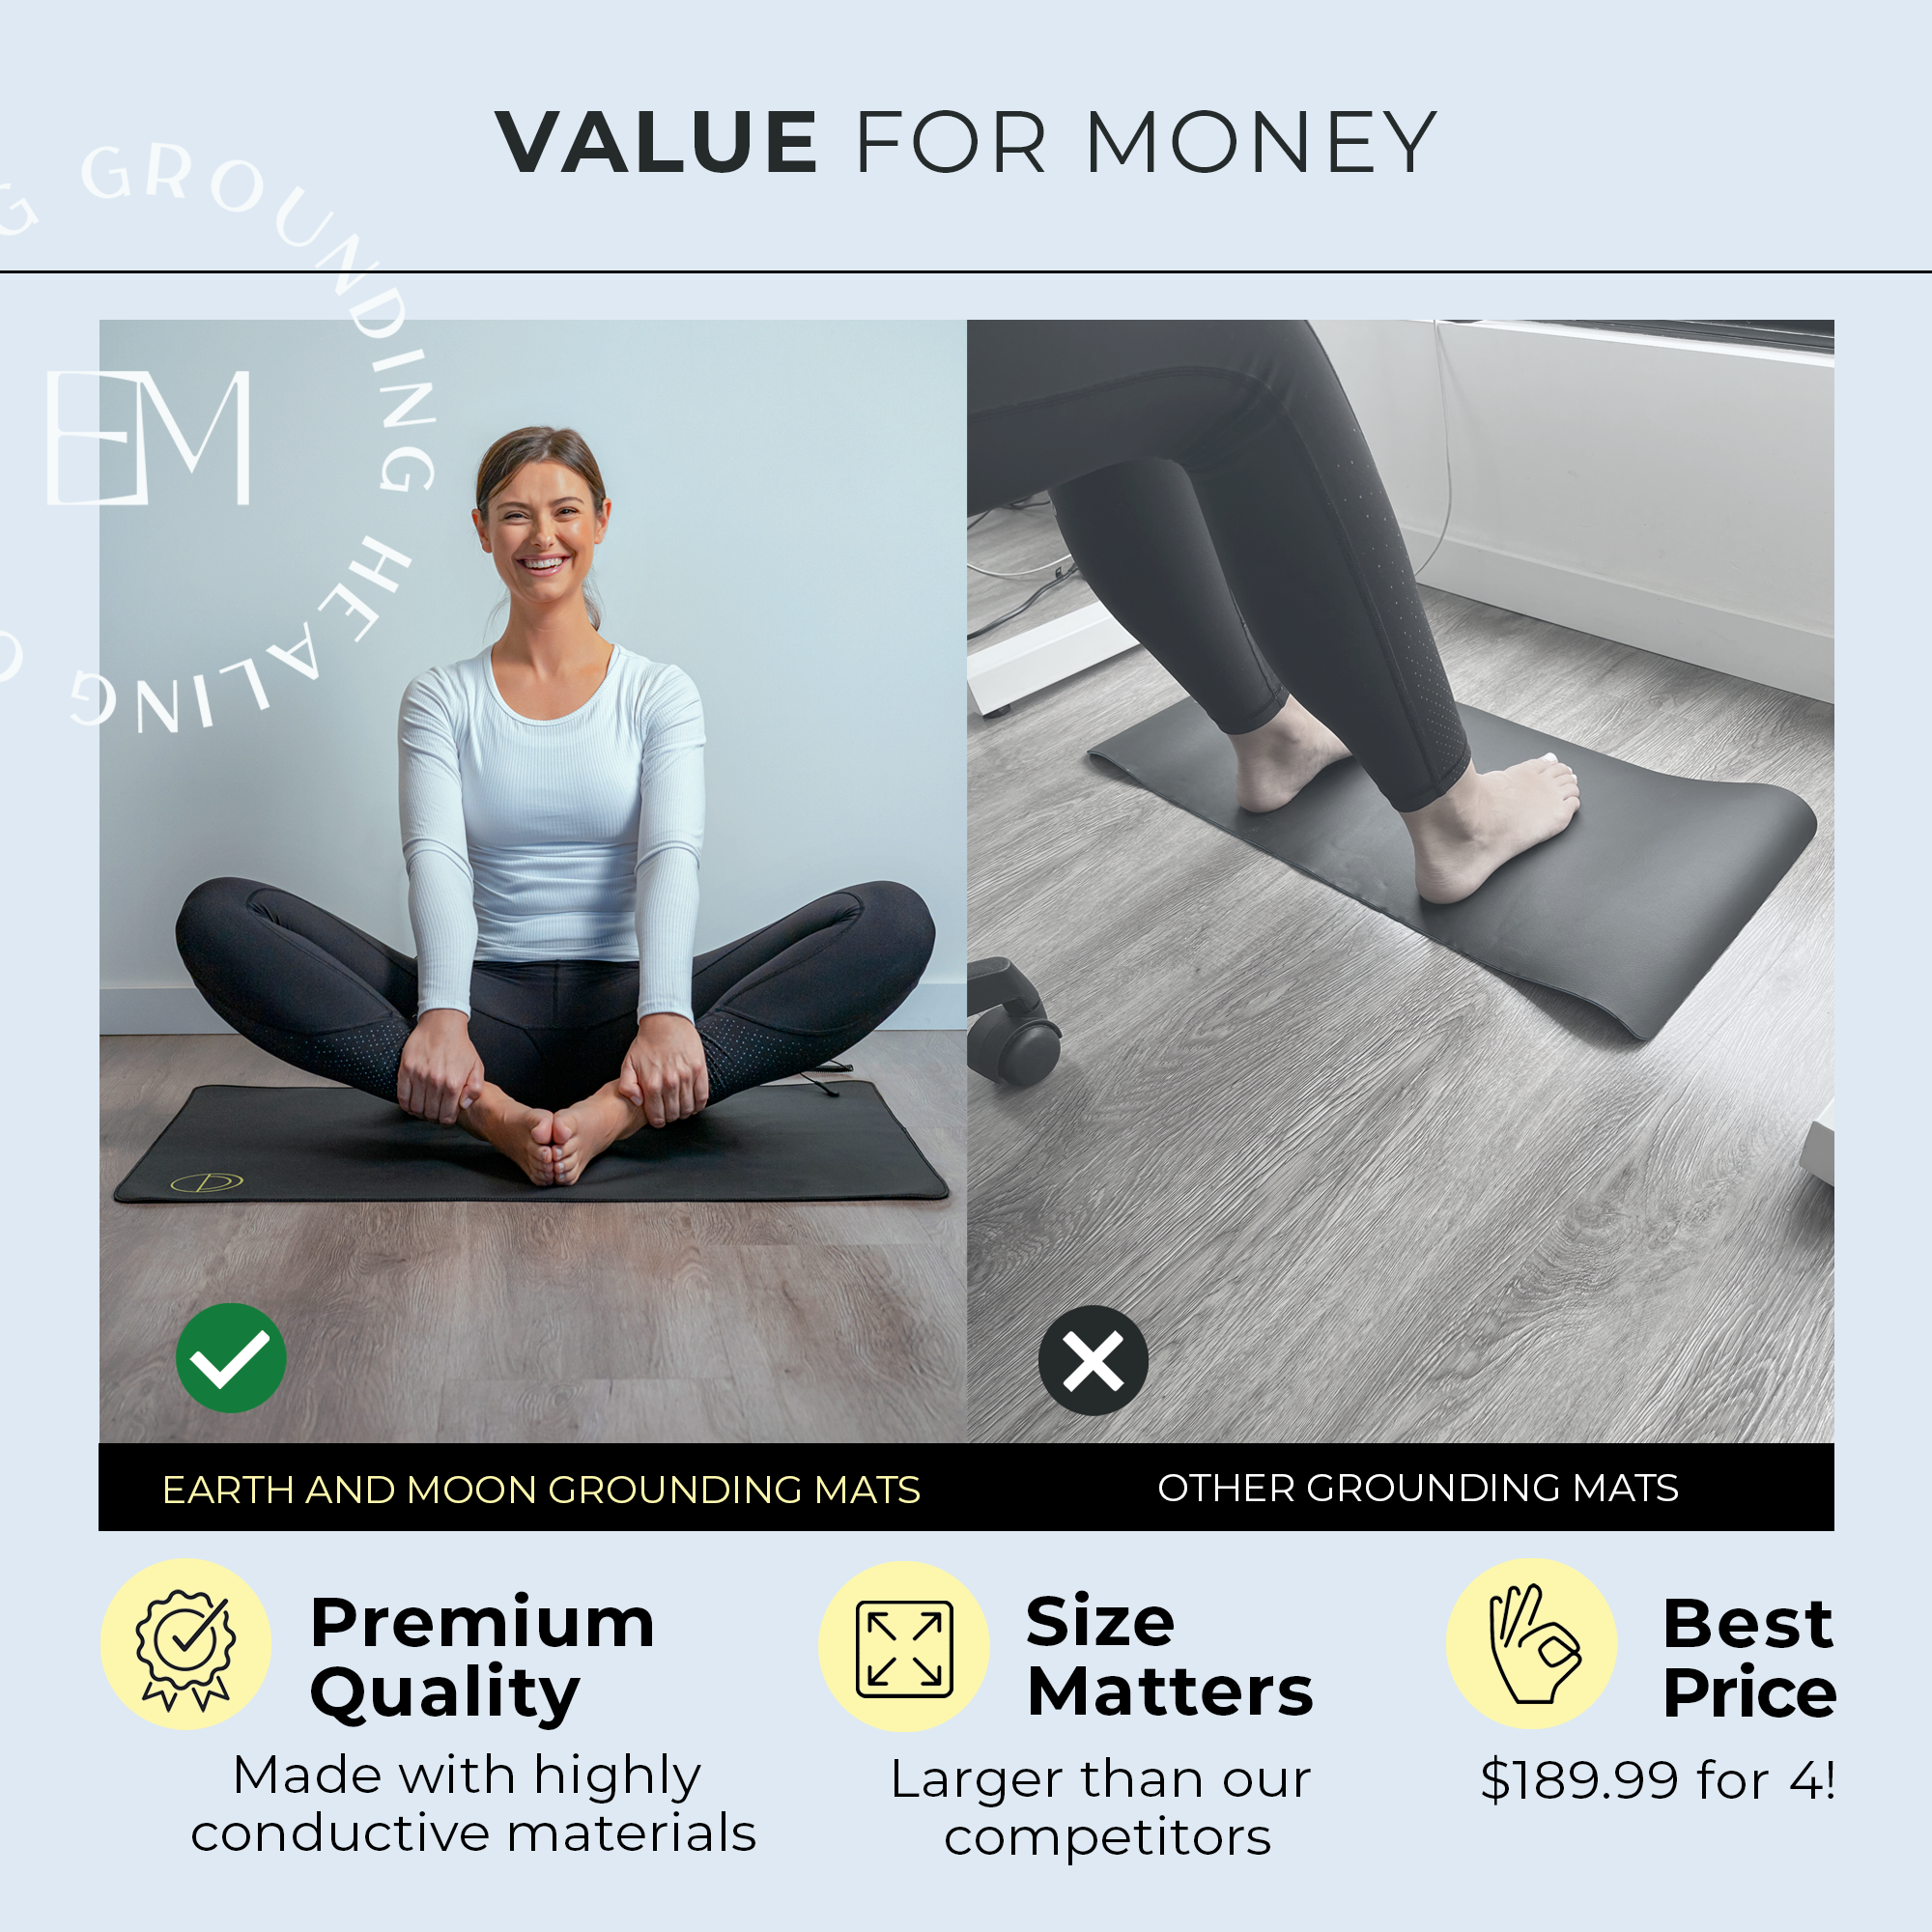 image comparing an earth and moon grounding mat to other brands showing value for money